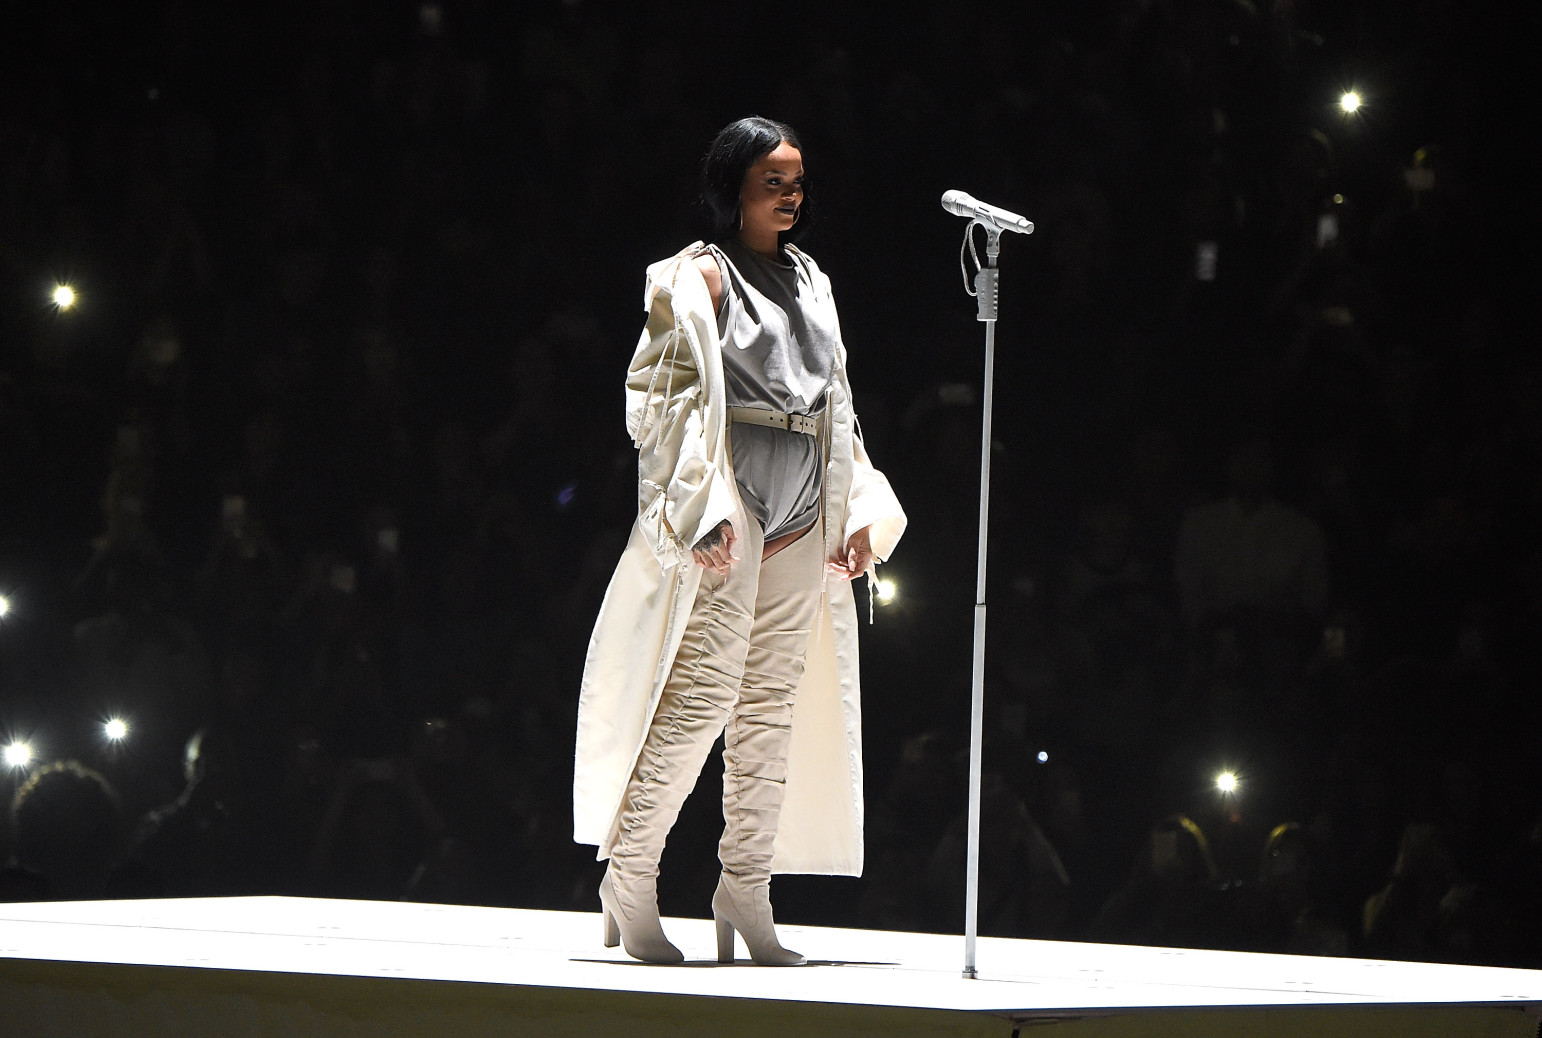 NEW YORK, NY - MARCH 27:  (Exclusive Coverage) Rihanna performs during her "Anti World Tour" at Barclays Center of Brooklyn on March 27, 2016 in New York City.  (Photo by Kevin Mazur/Getty Images for Fenty Corp)